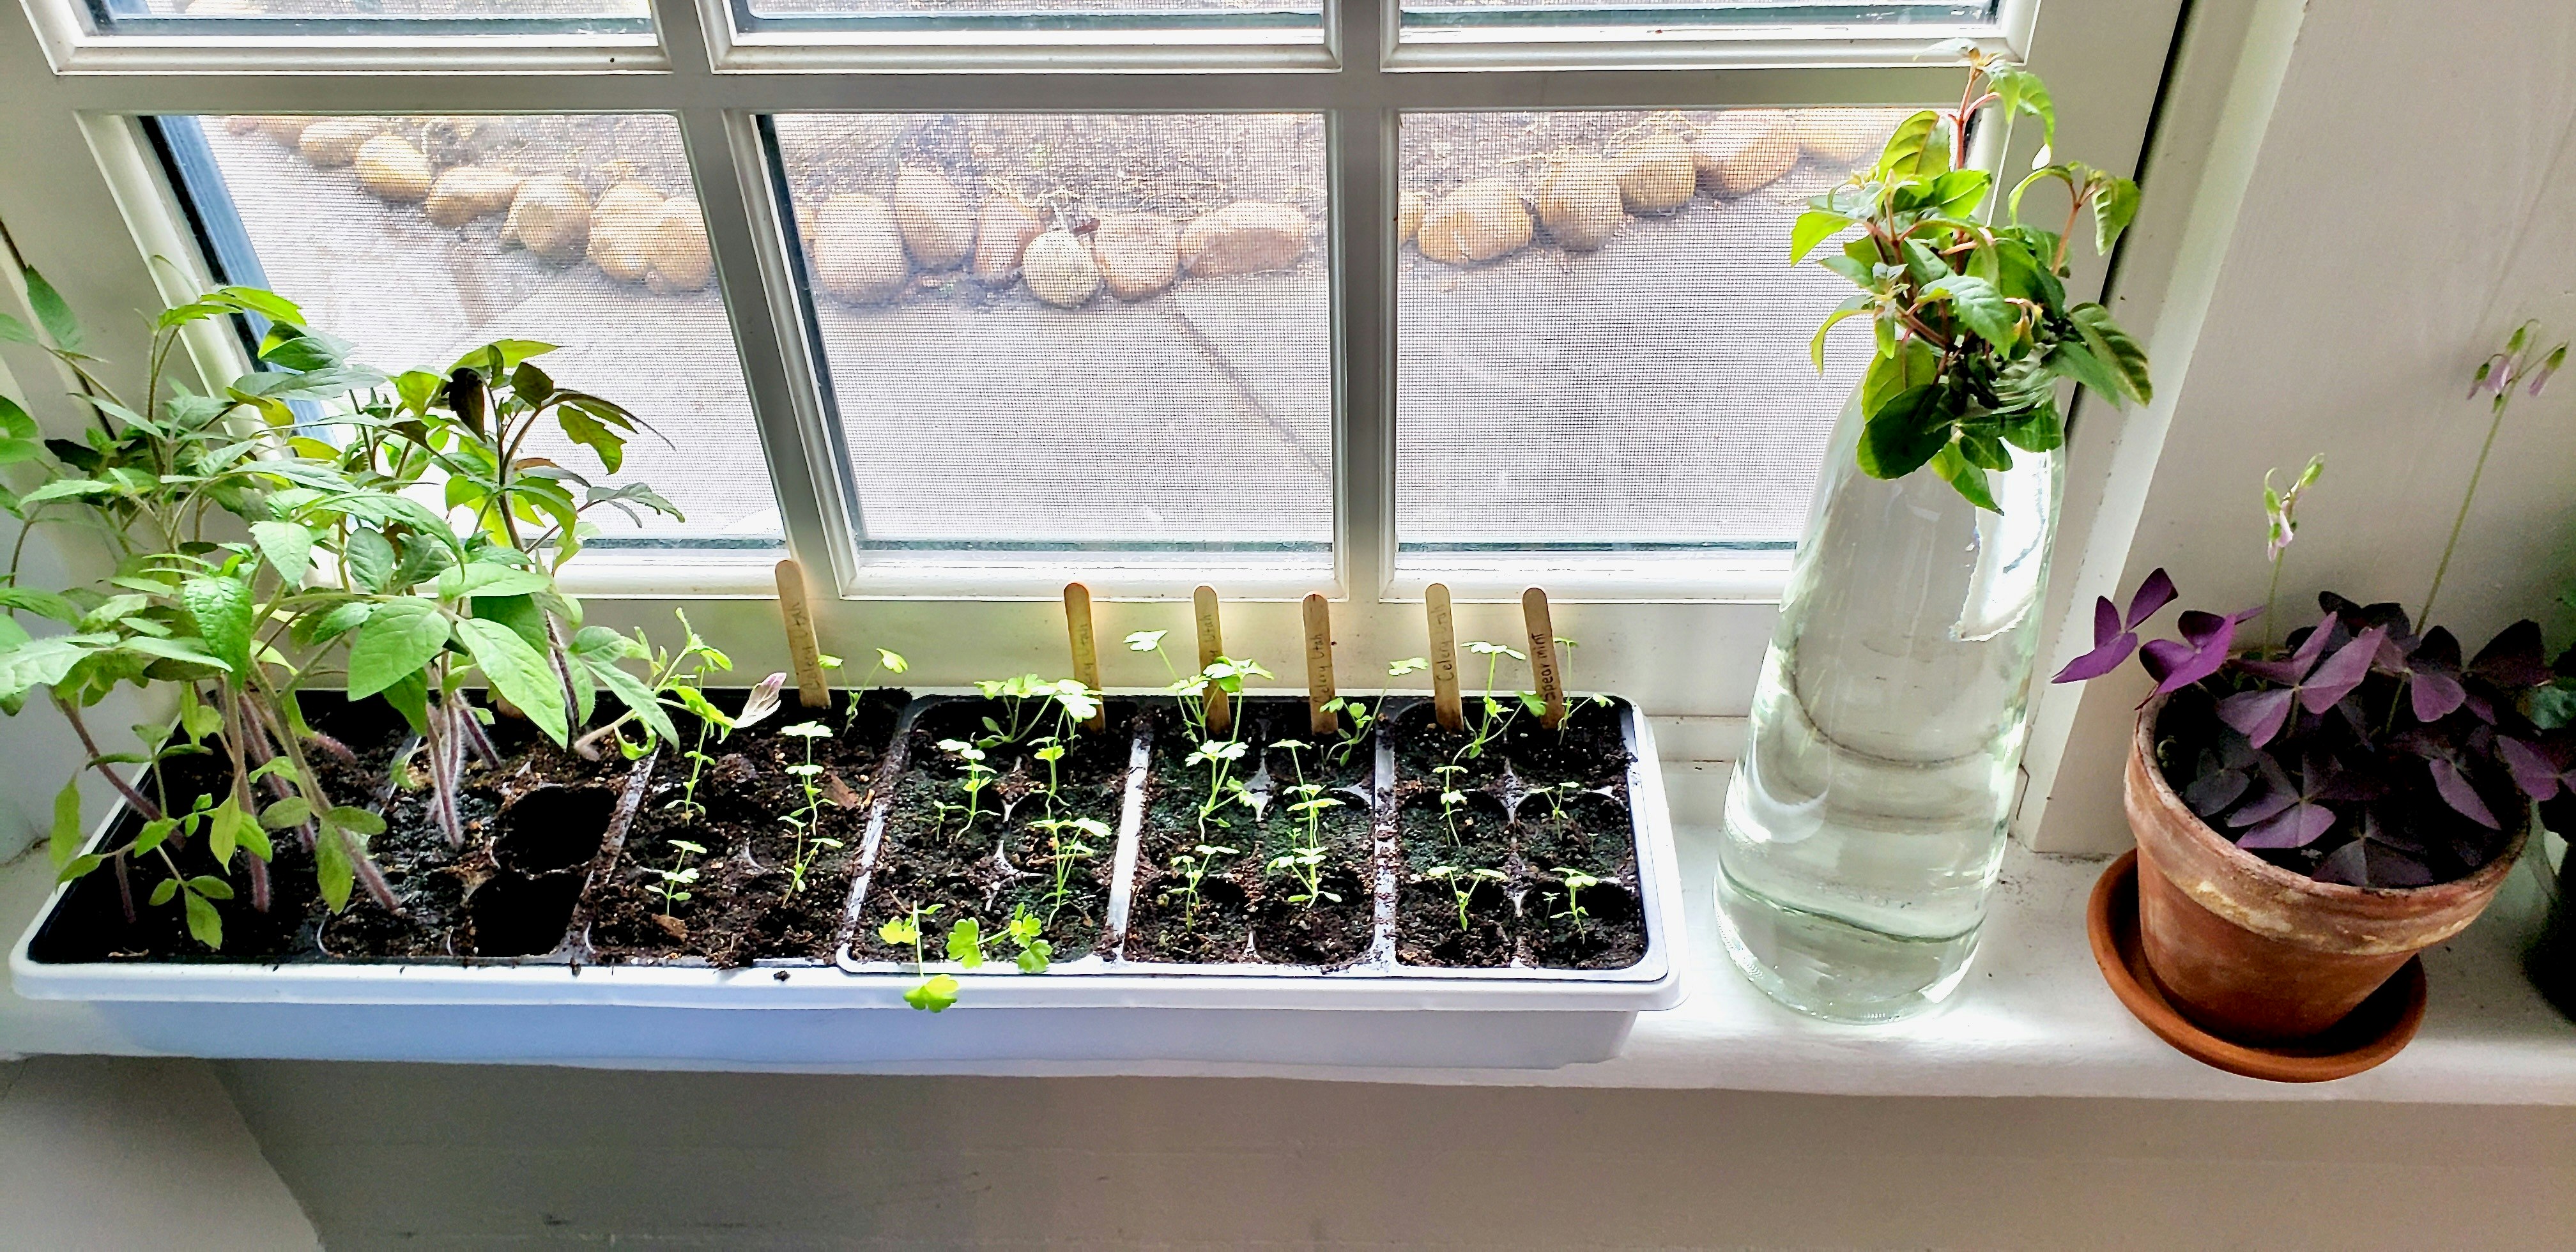 The Sturgis House features many plant-friendly windows.